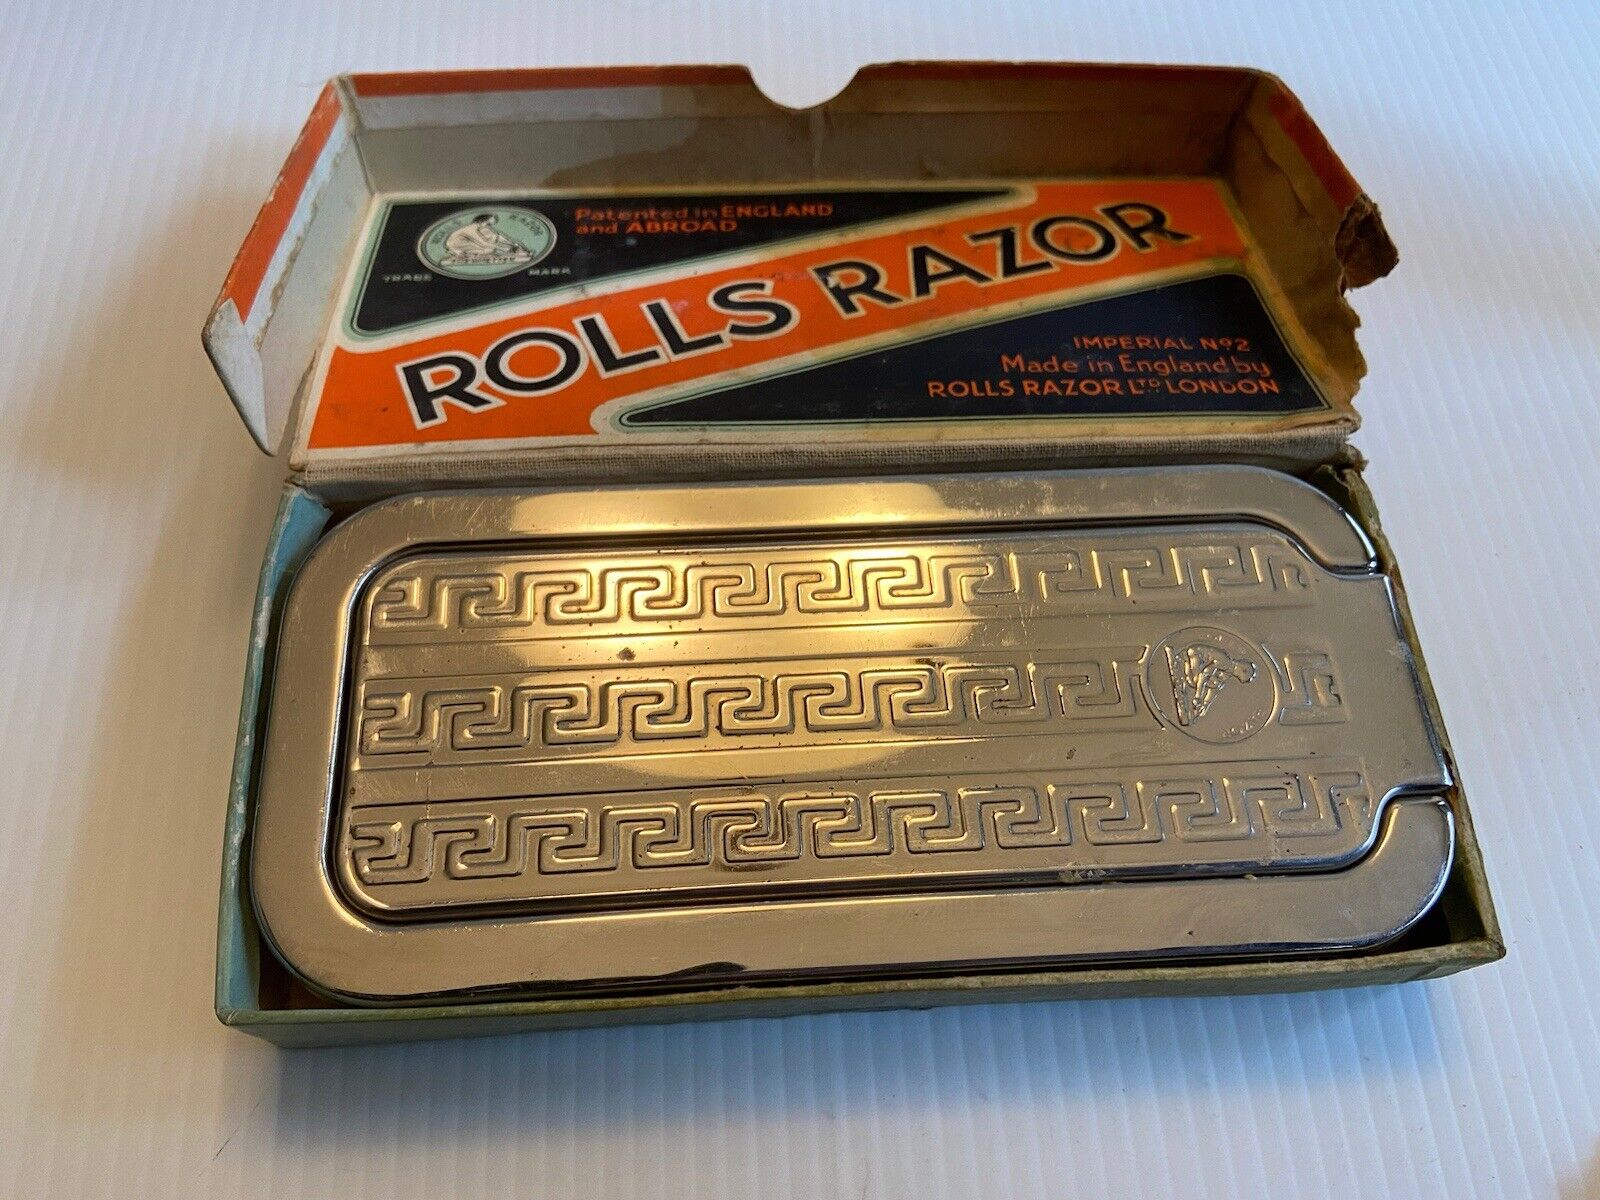 Vintage Rolls Razor Imperial No. 2 Made In England Original Box, Instructions